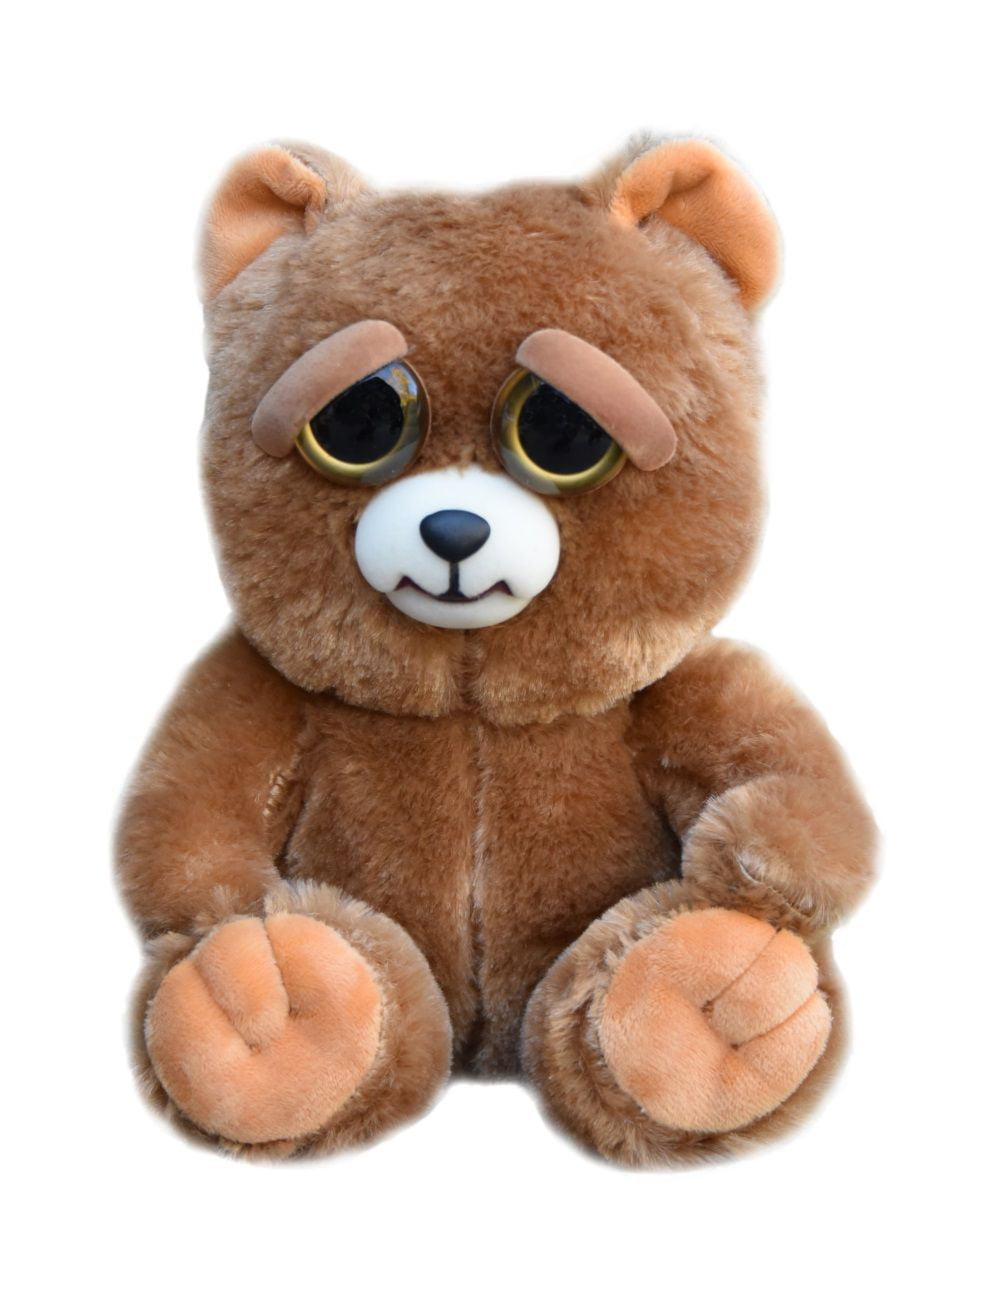 Feisty Pets Expressions Silly Sir-Growls-a-lot Plush Bear Sticks His Tongue Out 